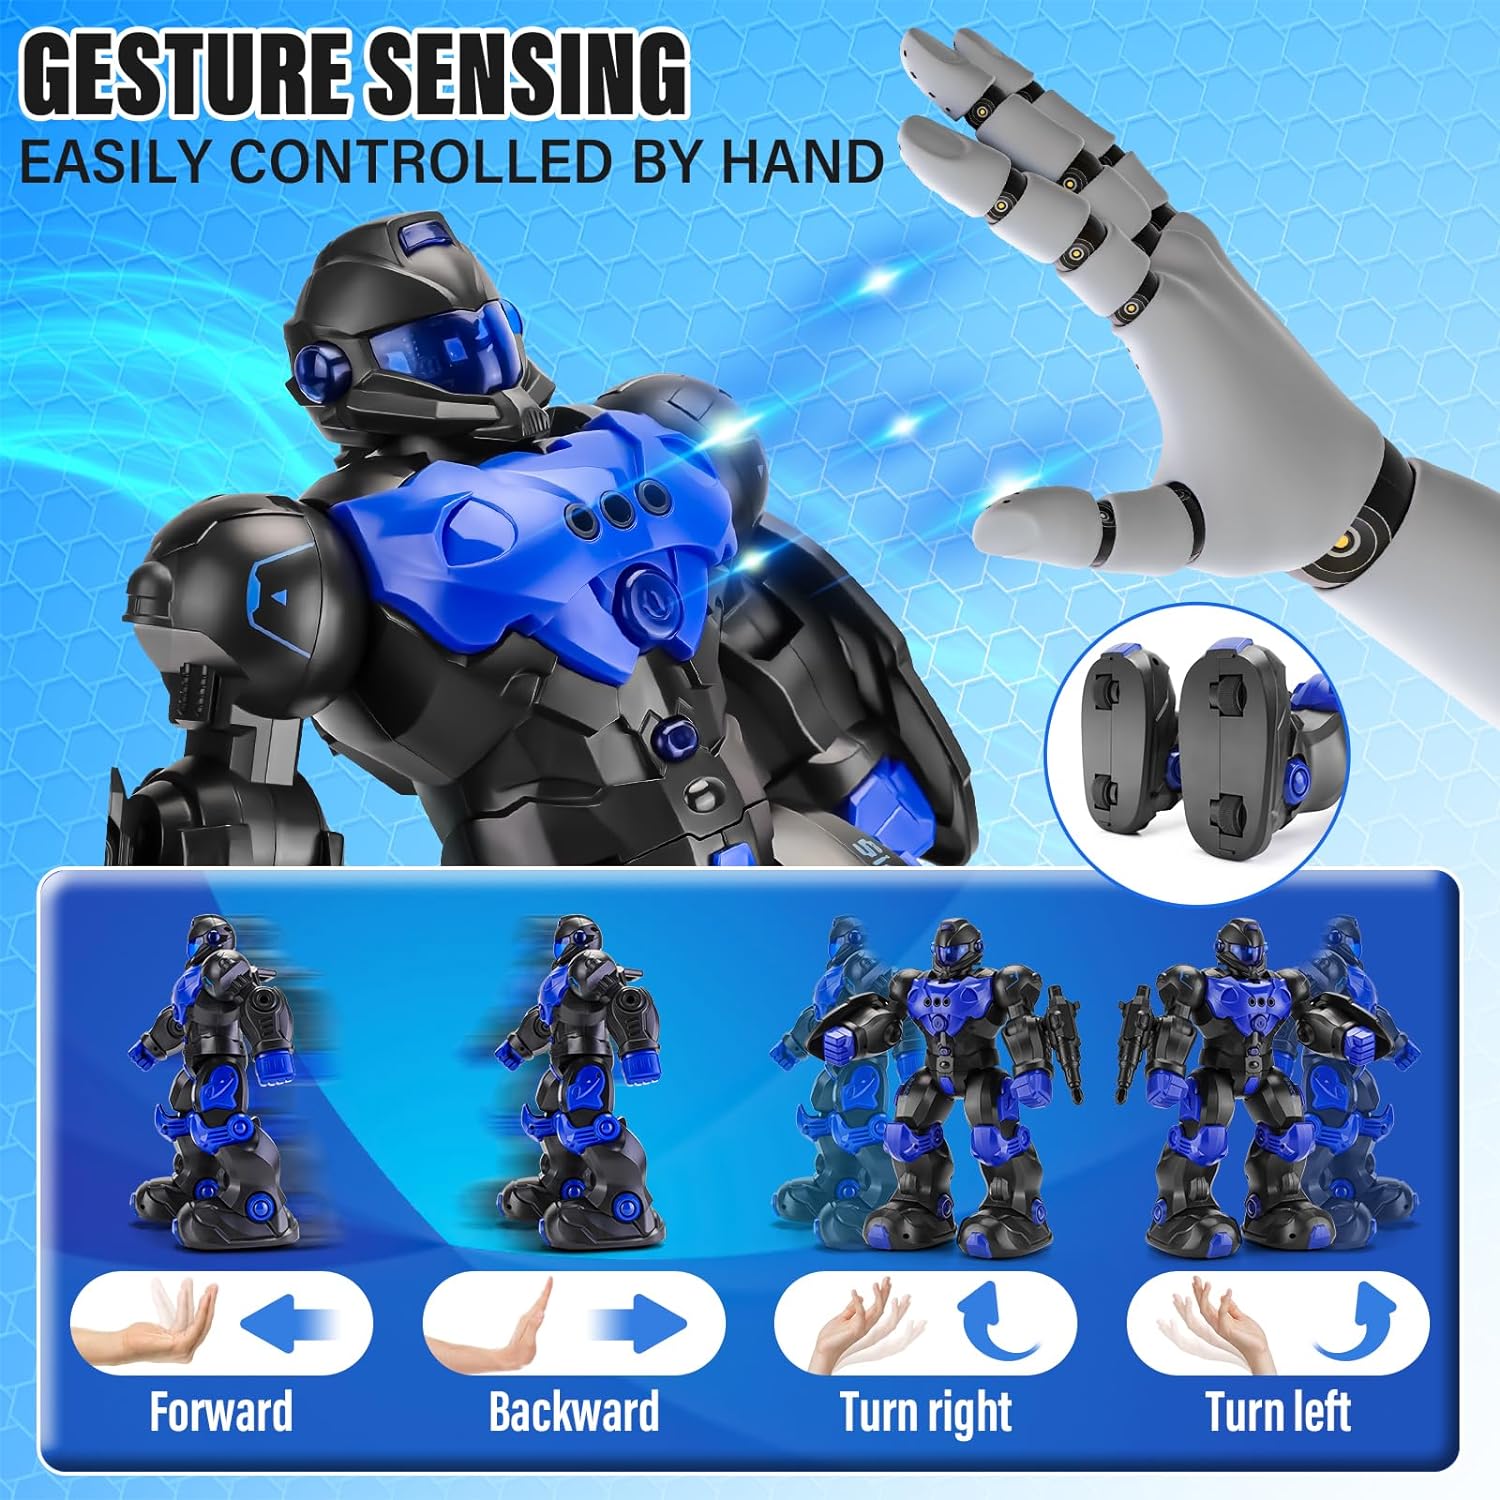 Robot Toys for Kids 6-8: Programmable Remote Control Robots with Intelligent Gesture Sensing